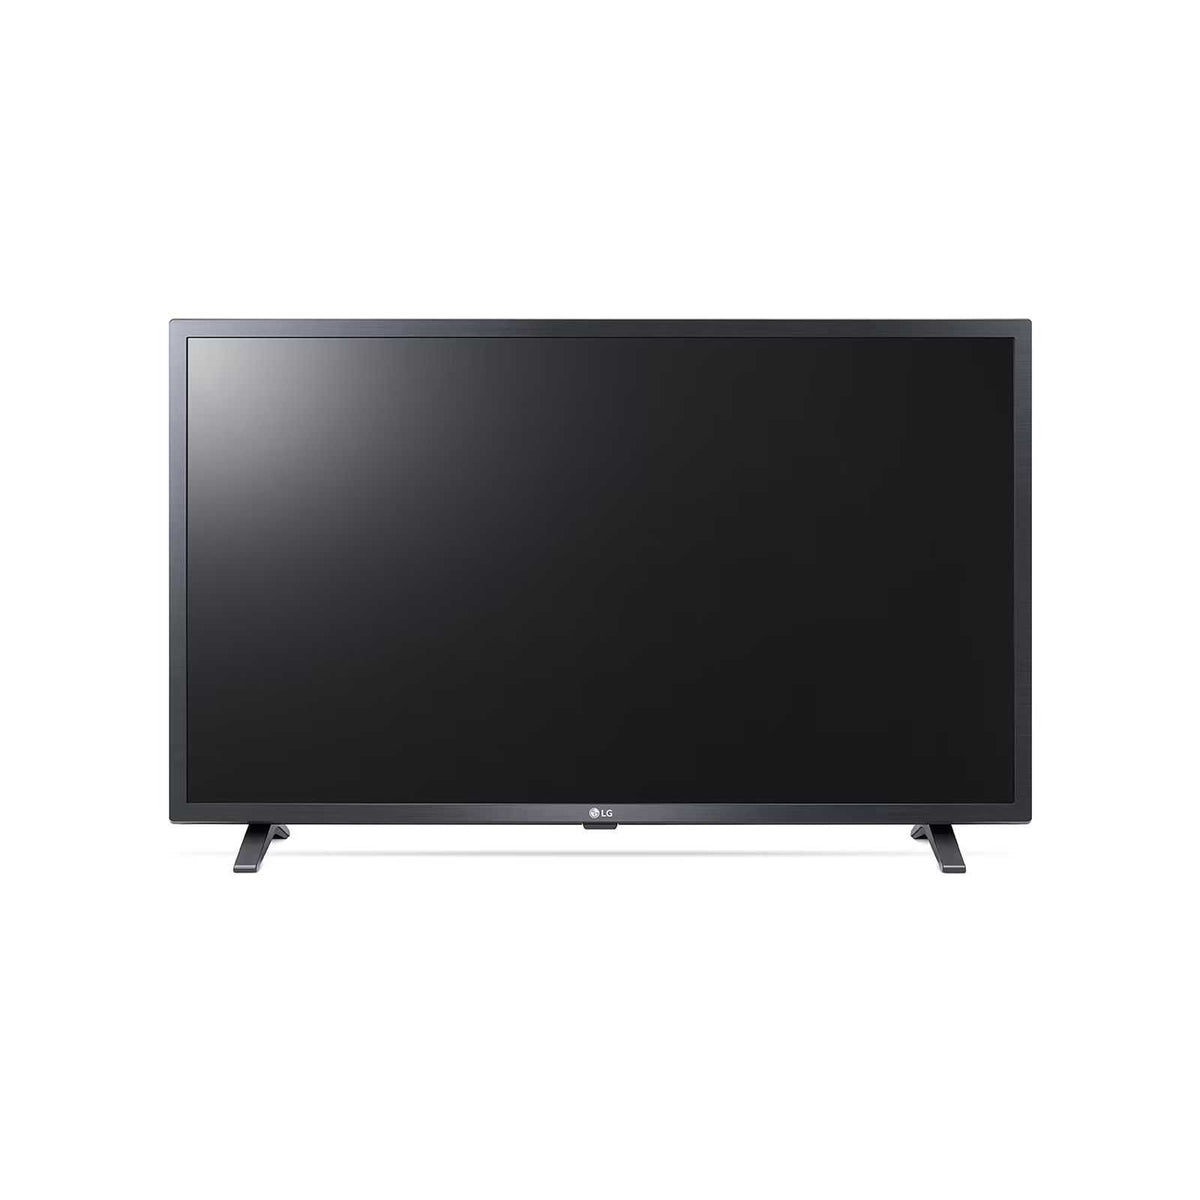 LG 32 Inch HD Smart LED TV with Built In Receiver - 32lq630b6lb